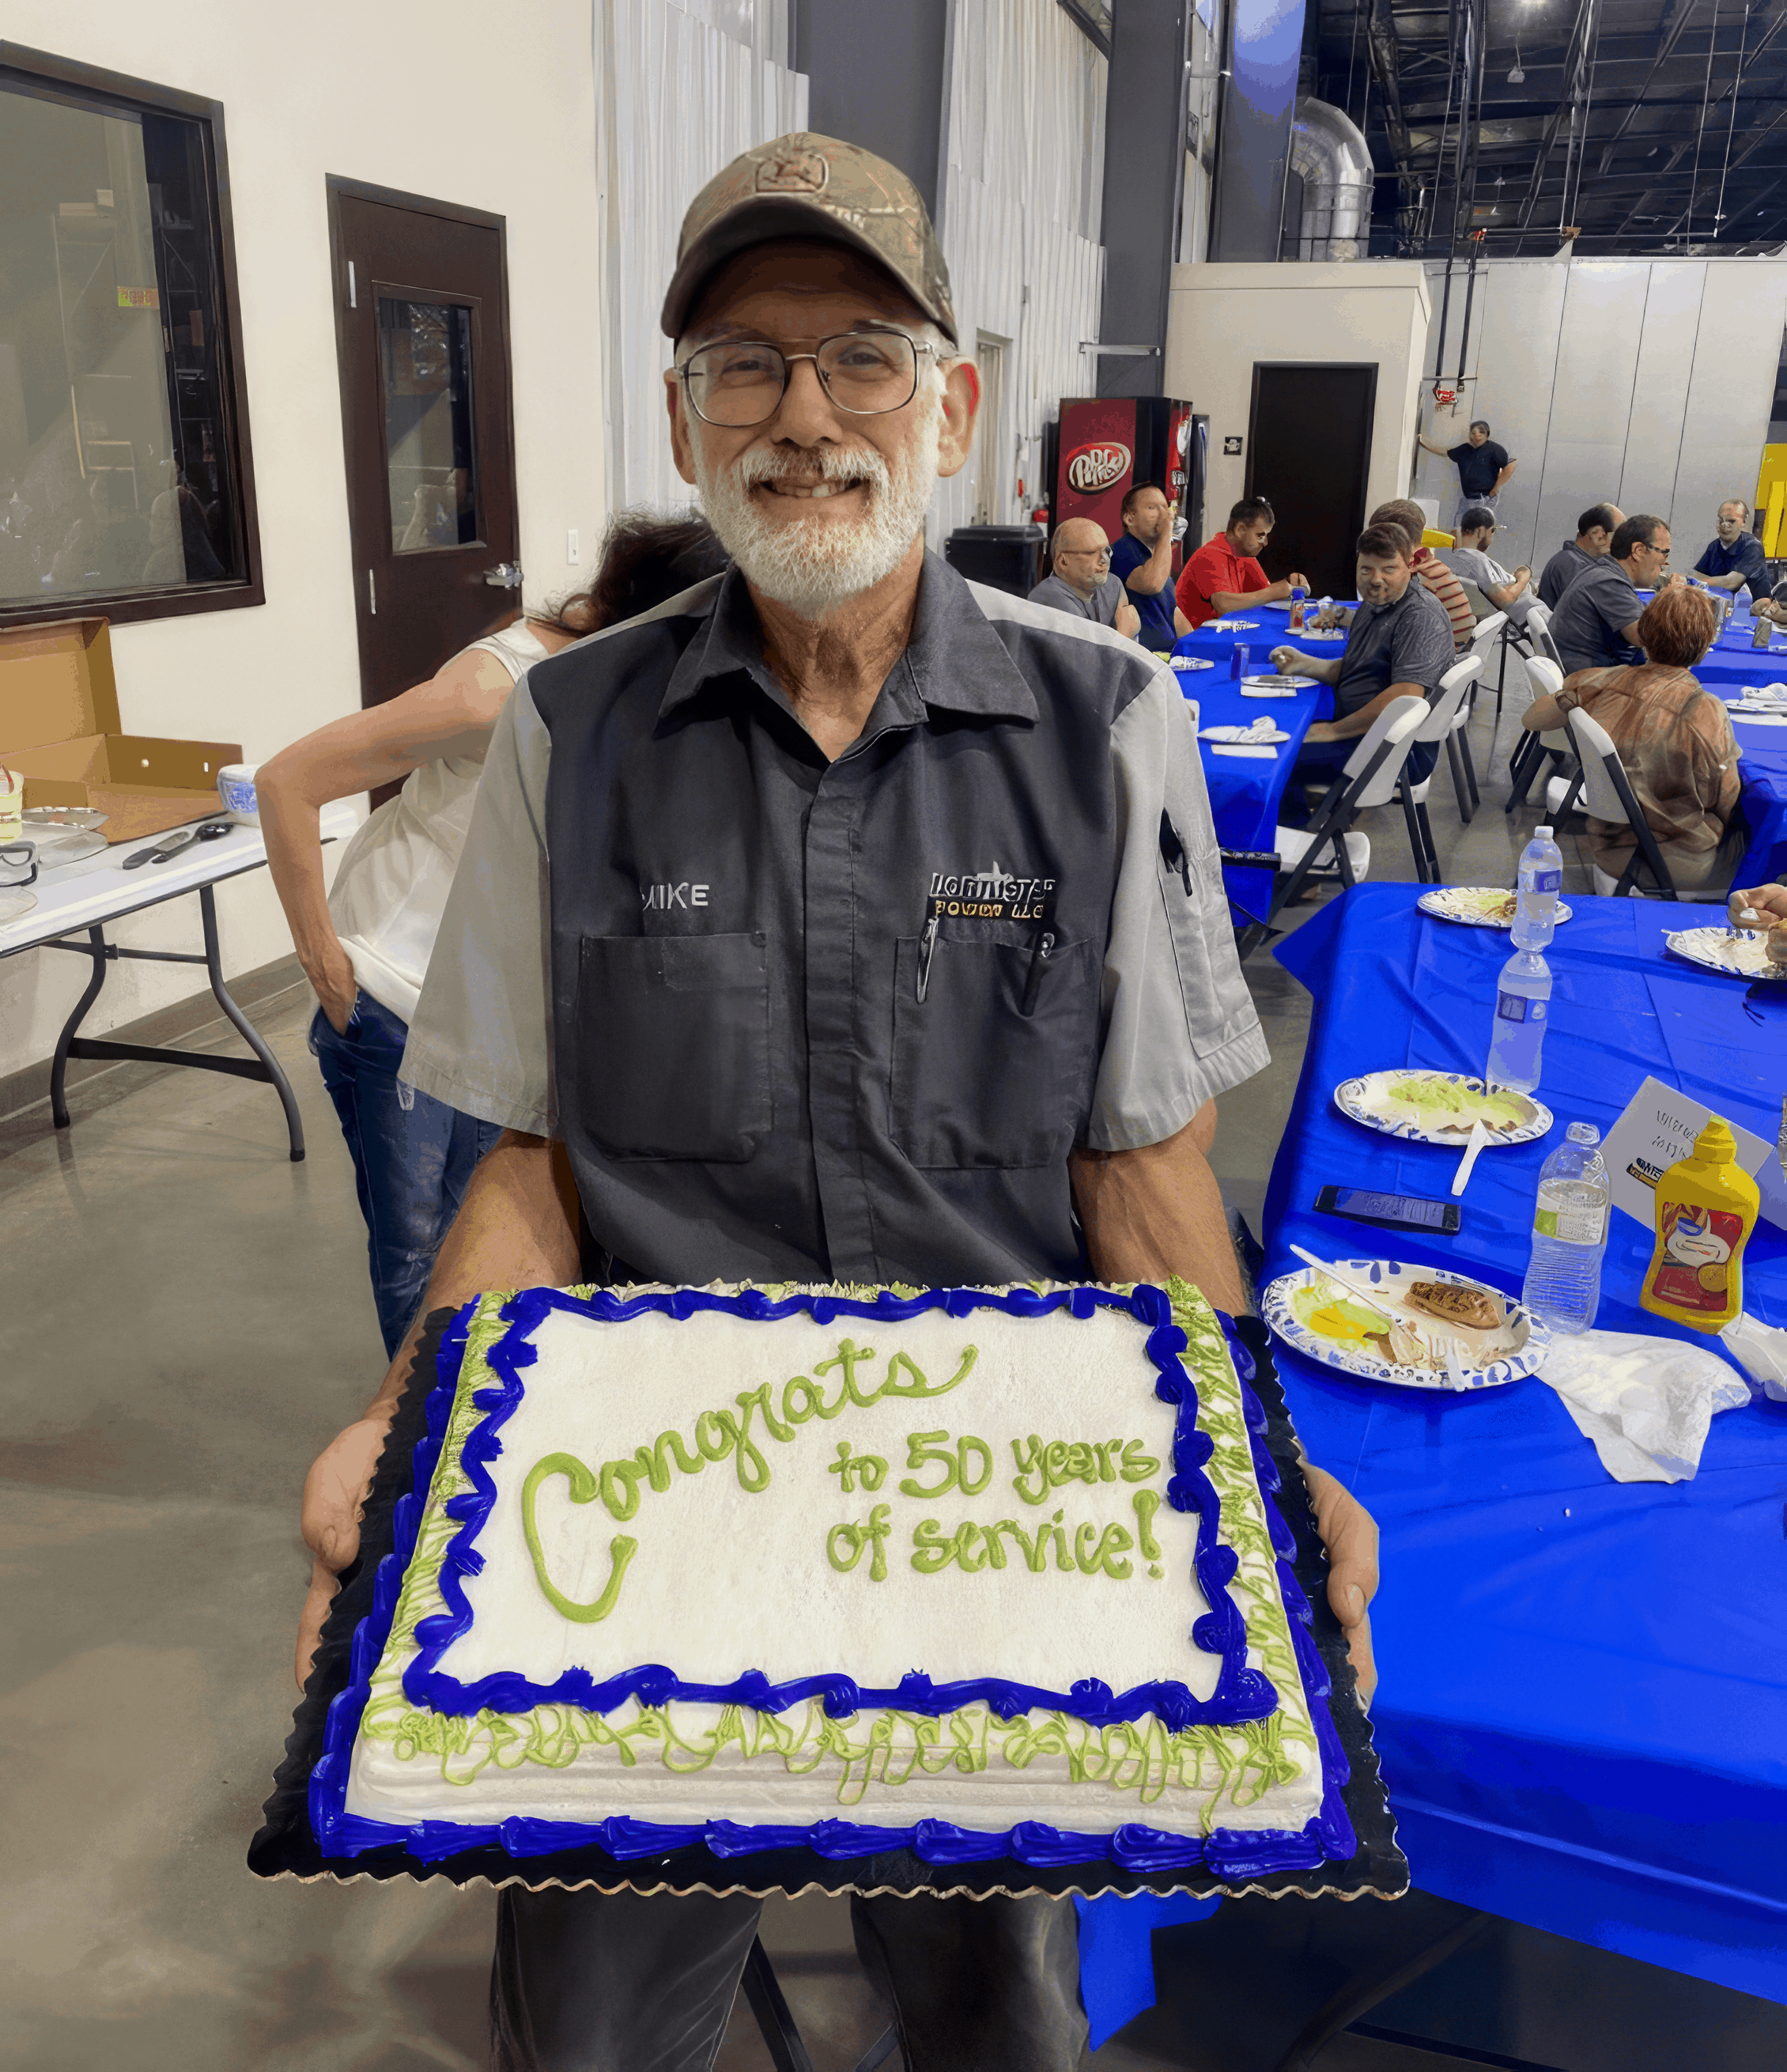 Mike Wagner with 50th Work Anniversary cake